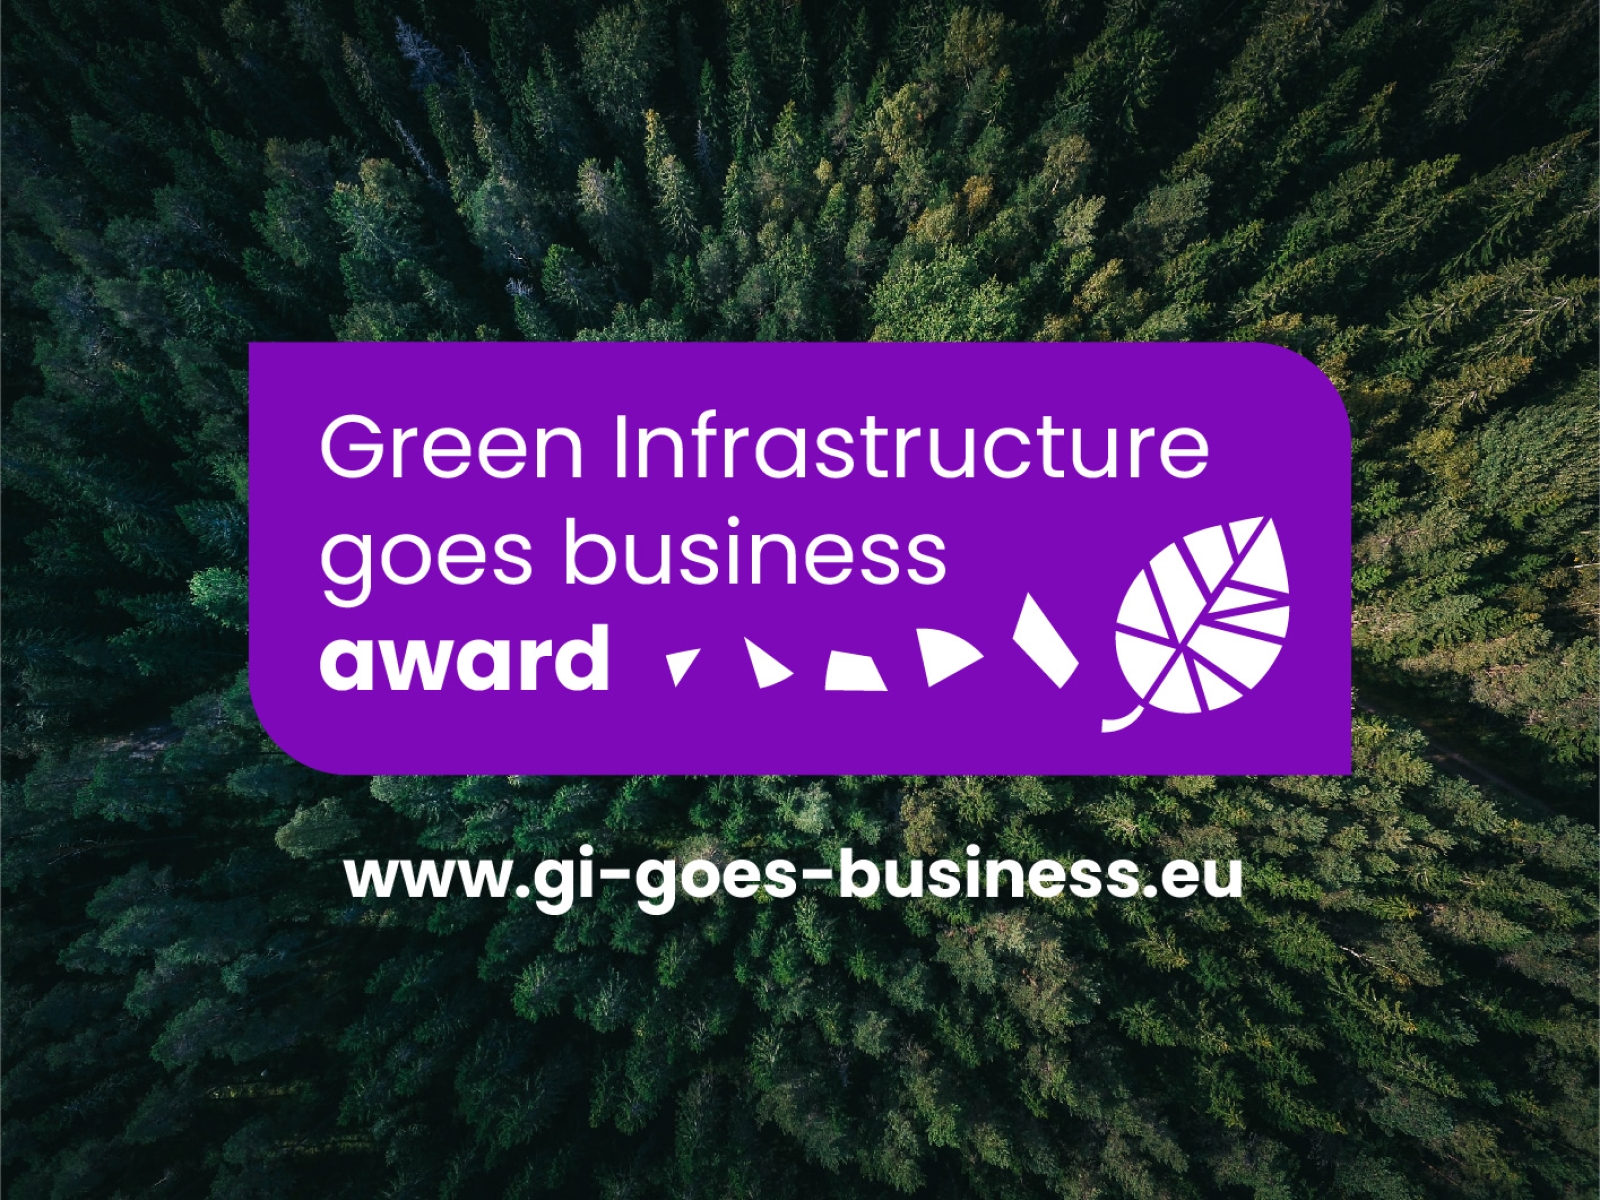 The Green Infrastructure goes business award is now open for application